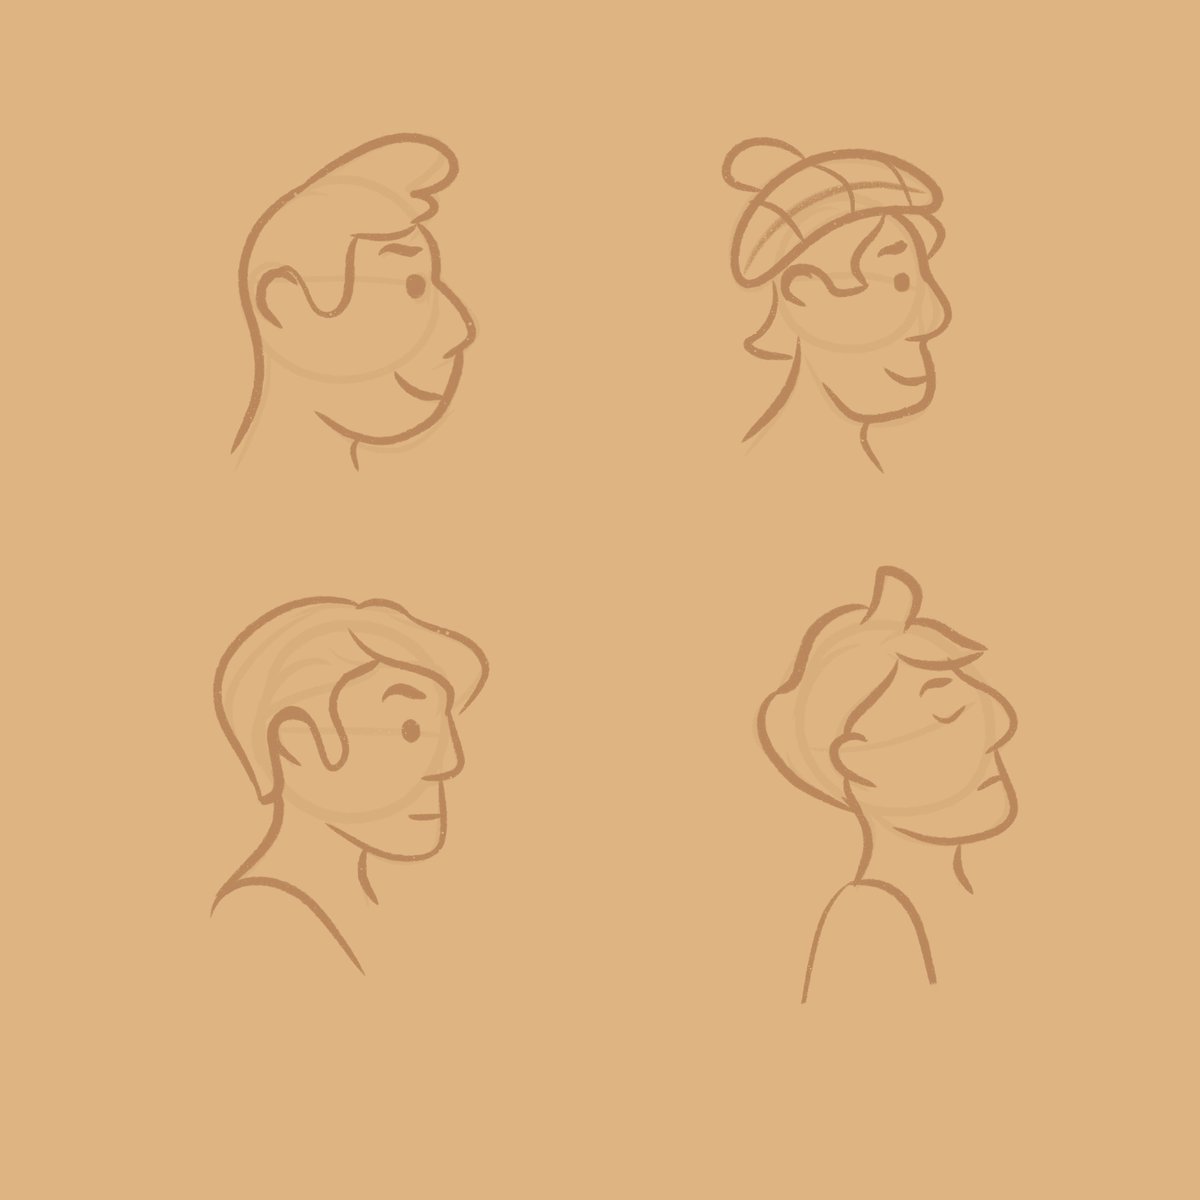 Practiced drawing some side profiles!
First batch #sketch #illustration #art #learntodraw